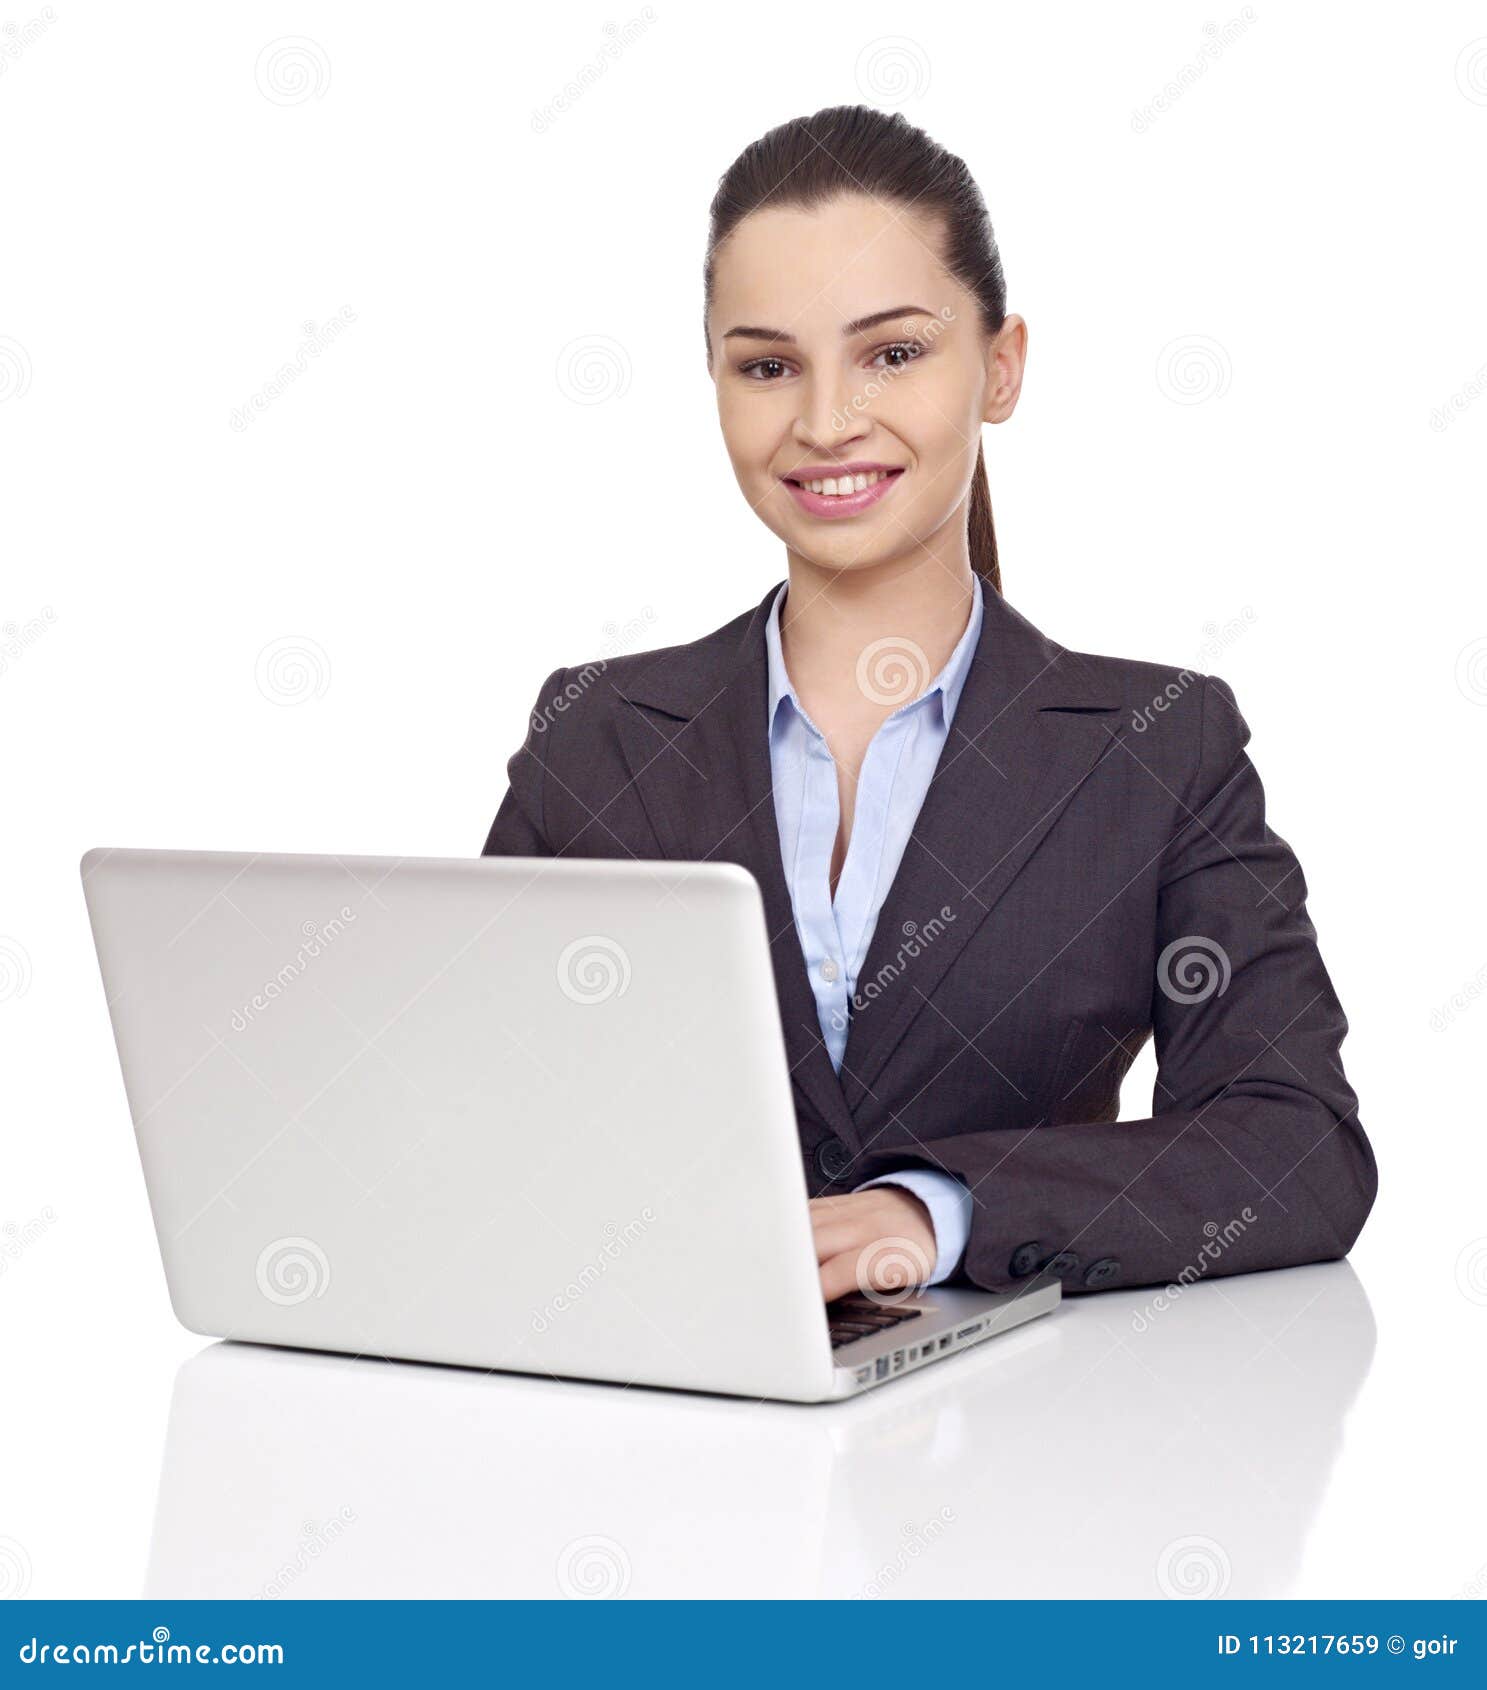 Business woman at desk stock image. Image of females - 113217659